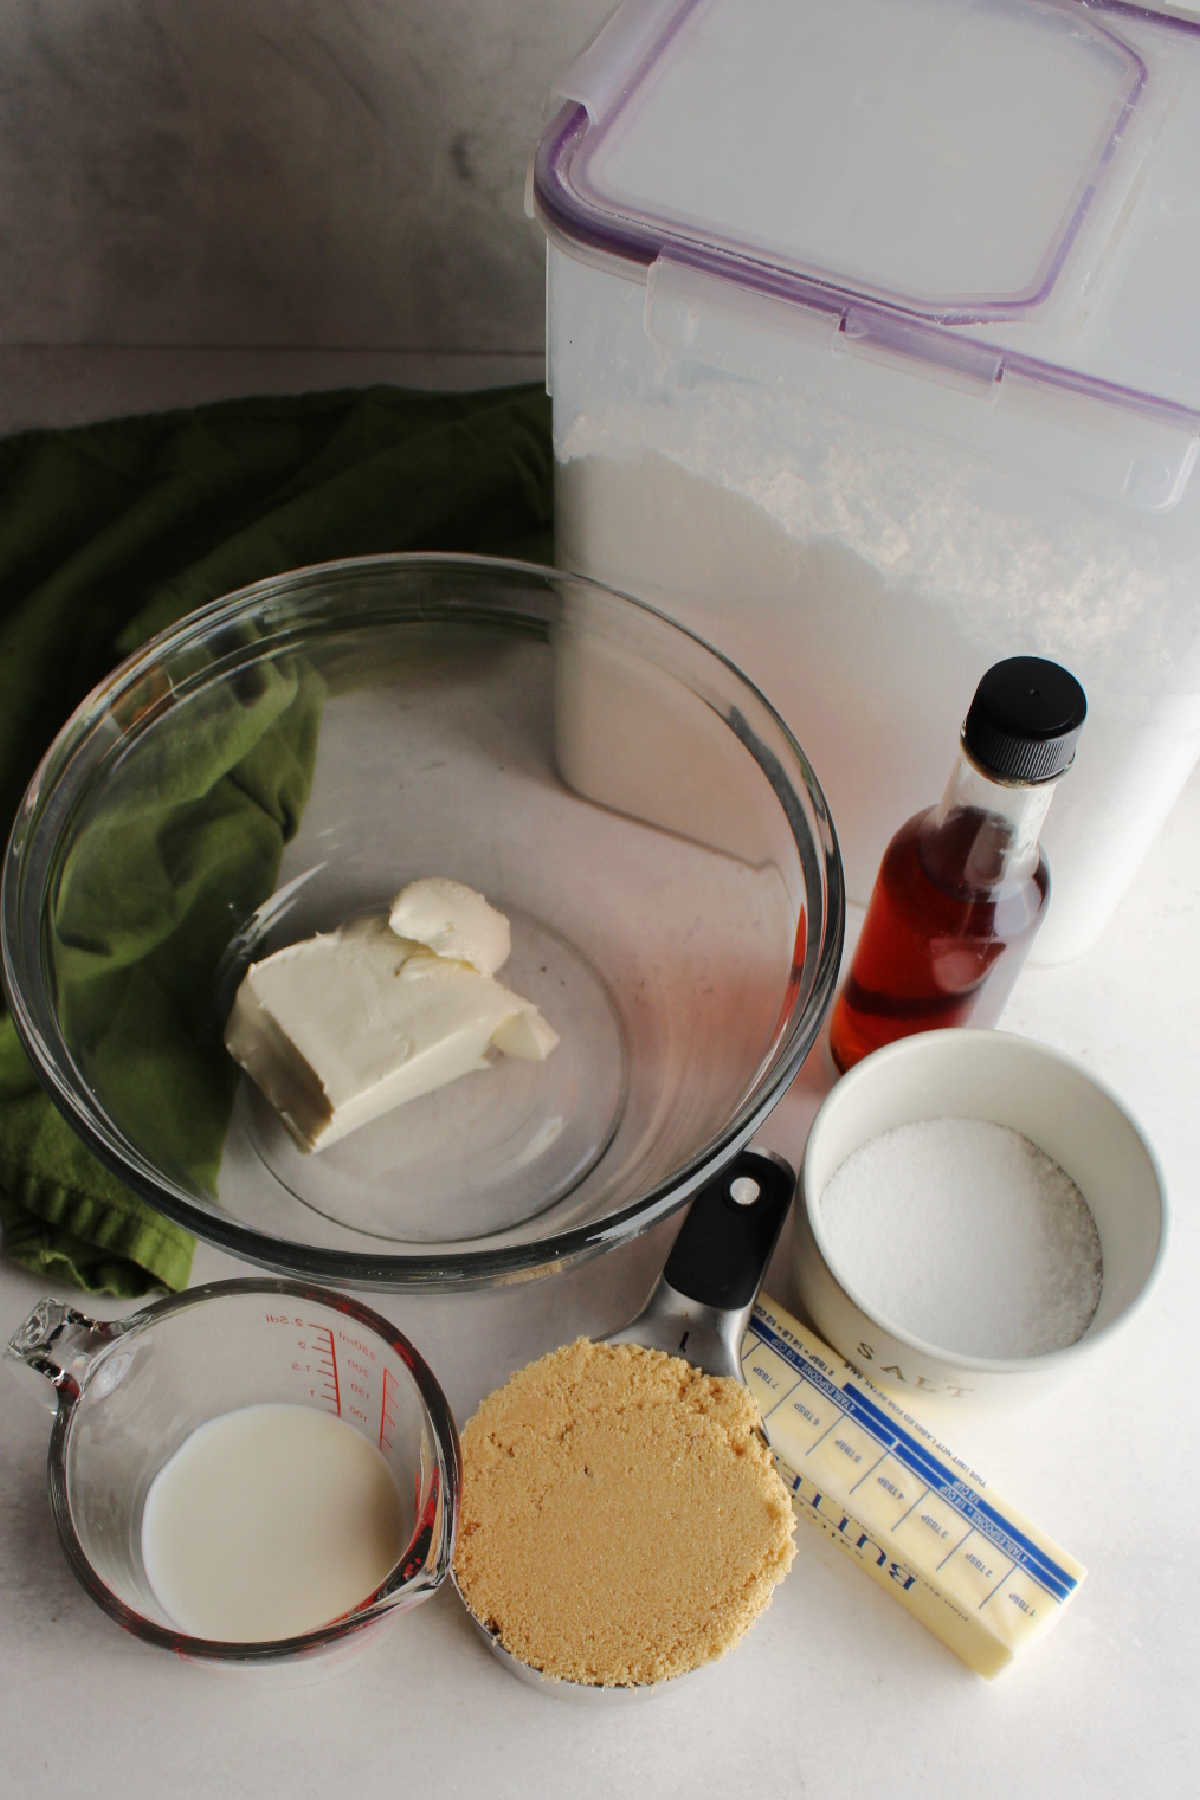 Ingredients: cream cheese, milk, brown sugar, butter, vanilla, salt and confectioners sugar ready to be made into icing.